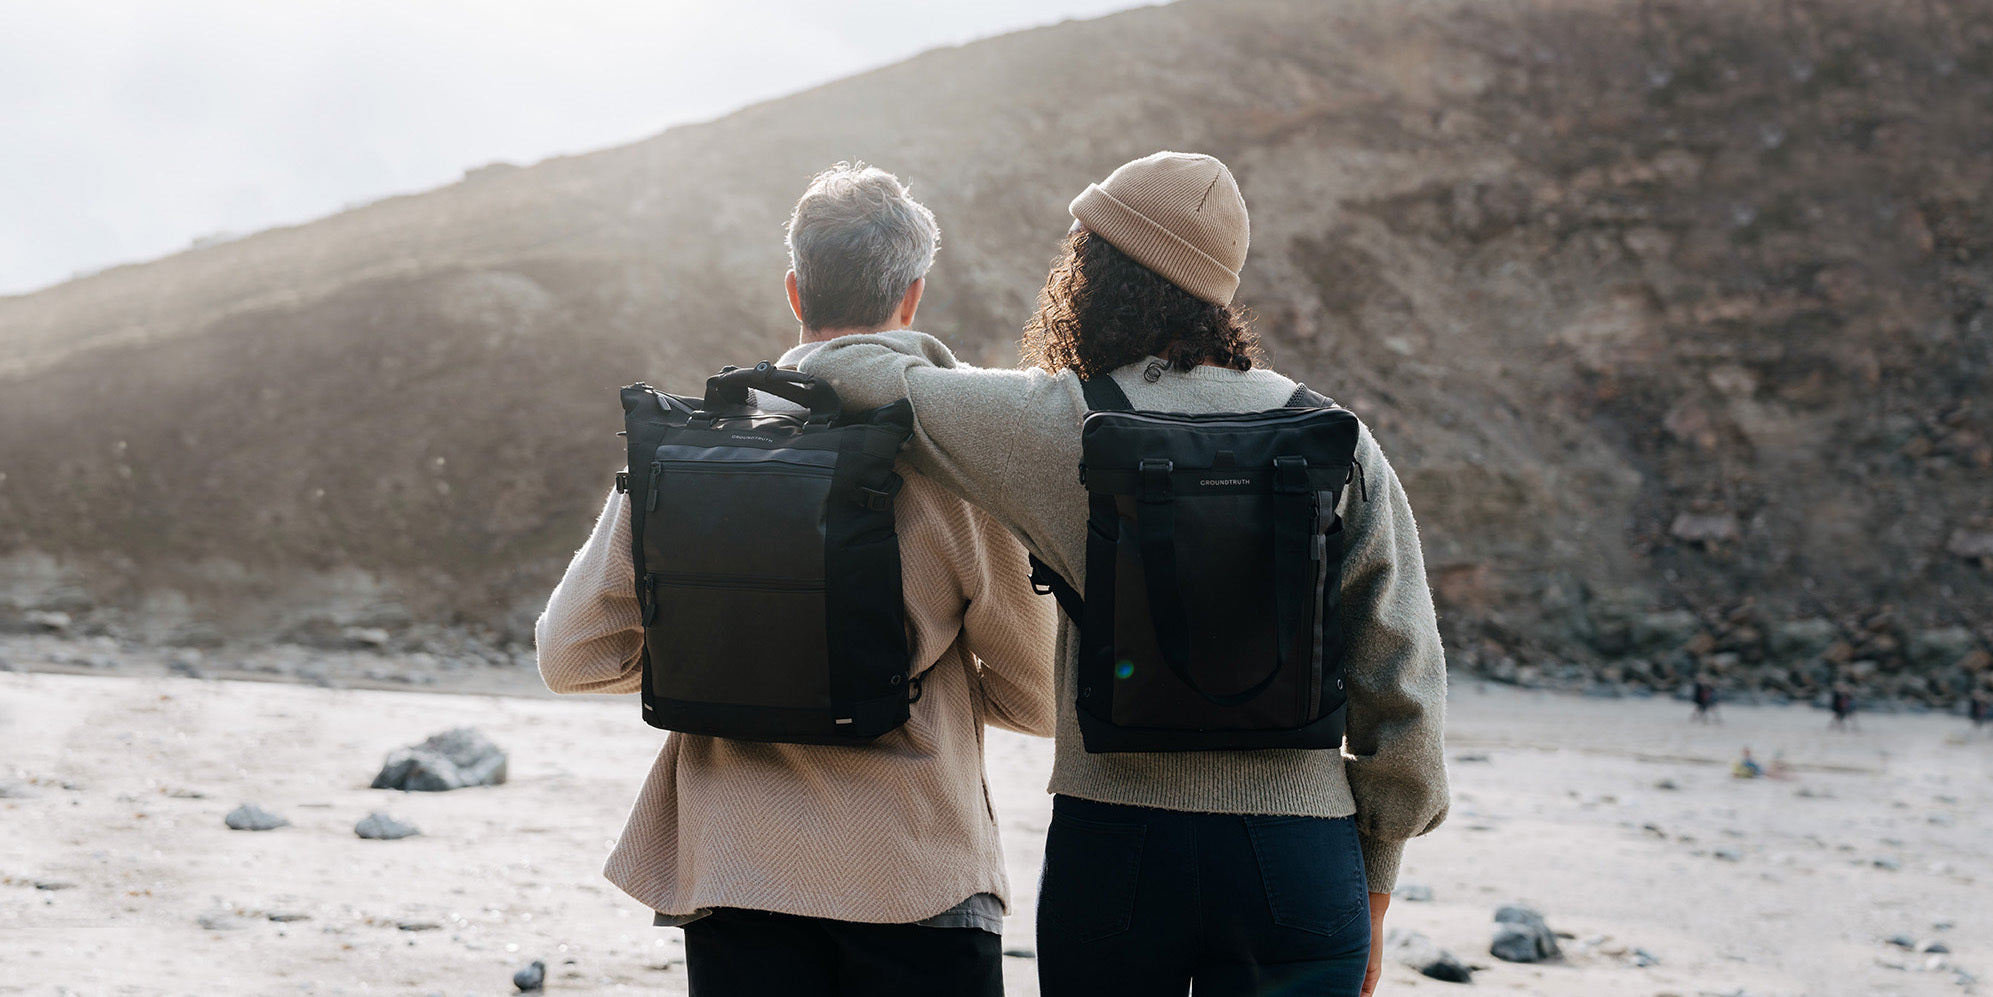 Groundtruth Backpacks for every Journey - 17L Tech Tote and 10L Tote Pack